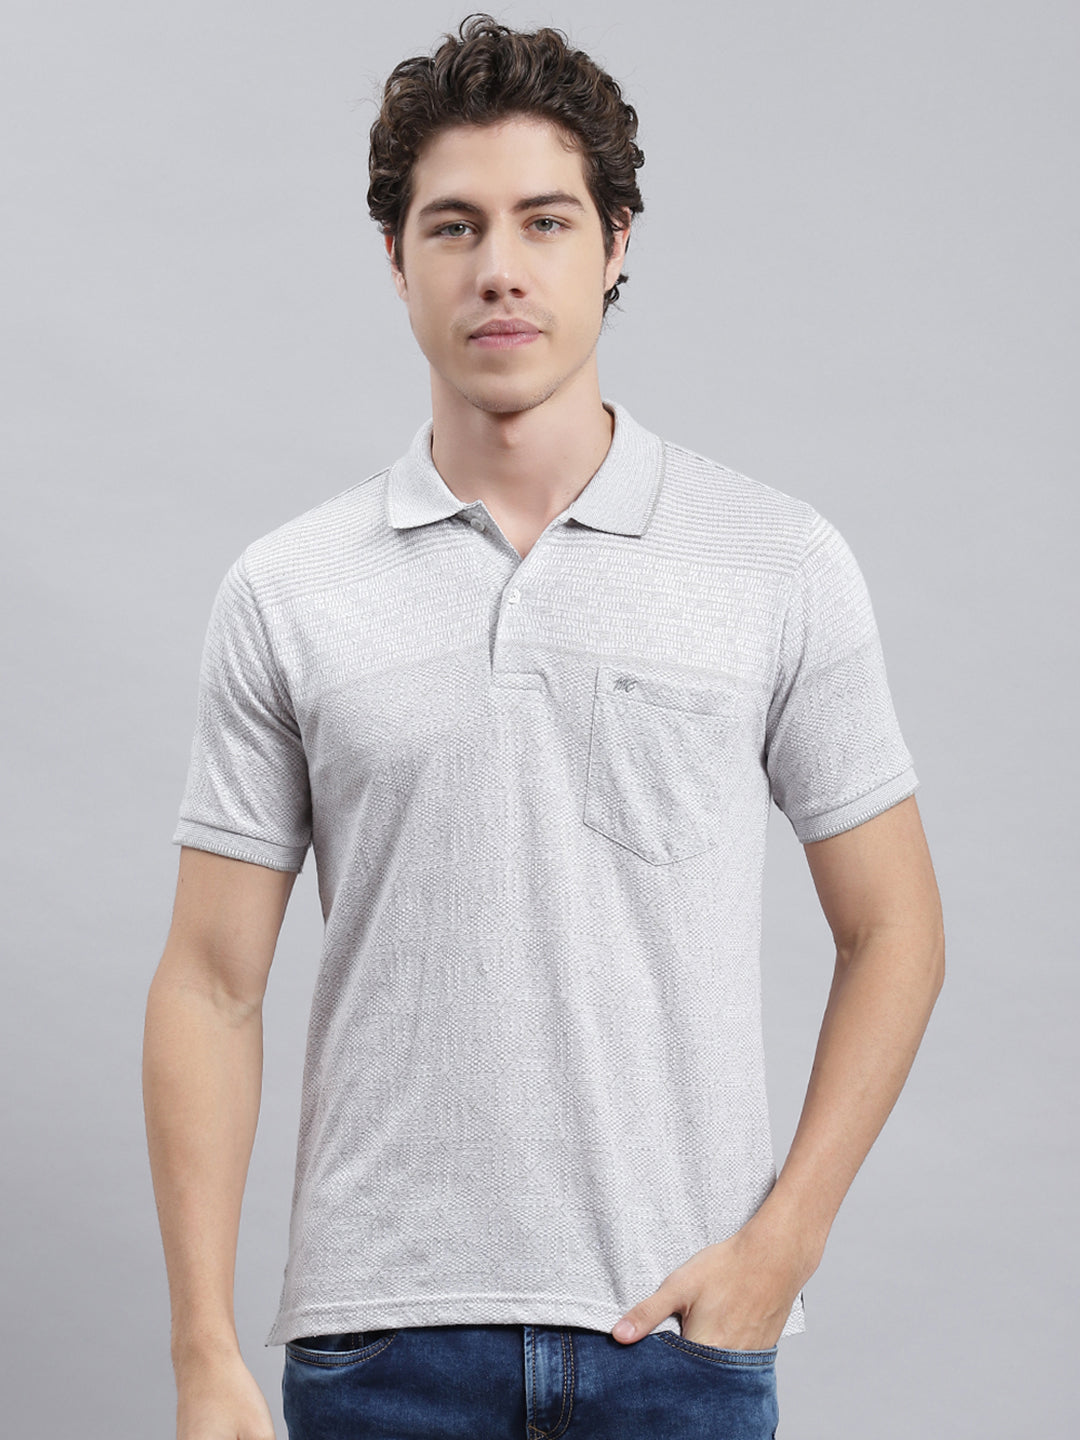 Monte Carlo Black Solid Polo Collar T-Shirt (13205) in Bangalore at best  price by Crocodile - Justdial